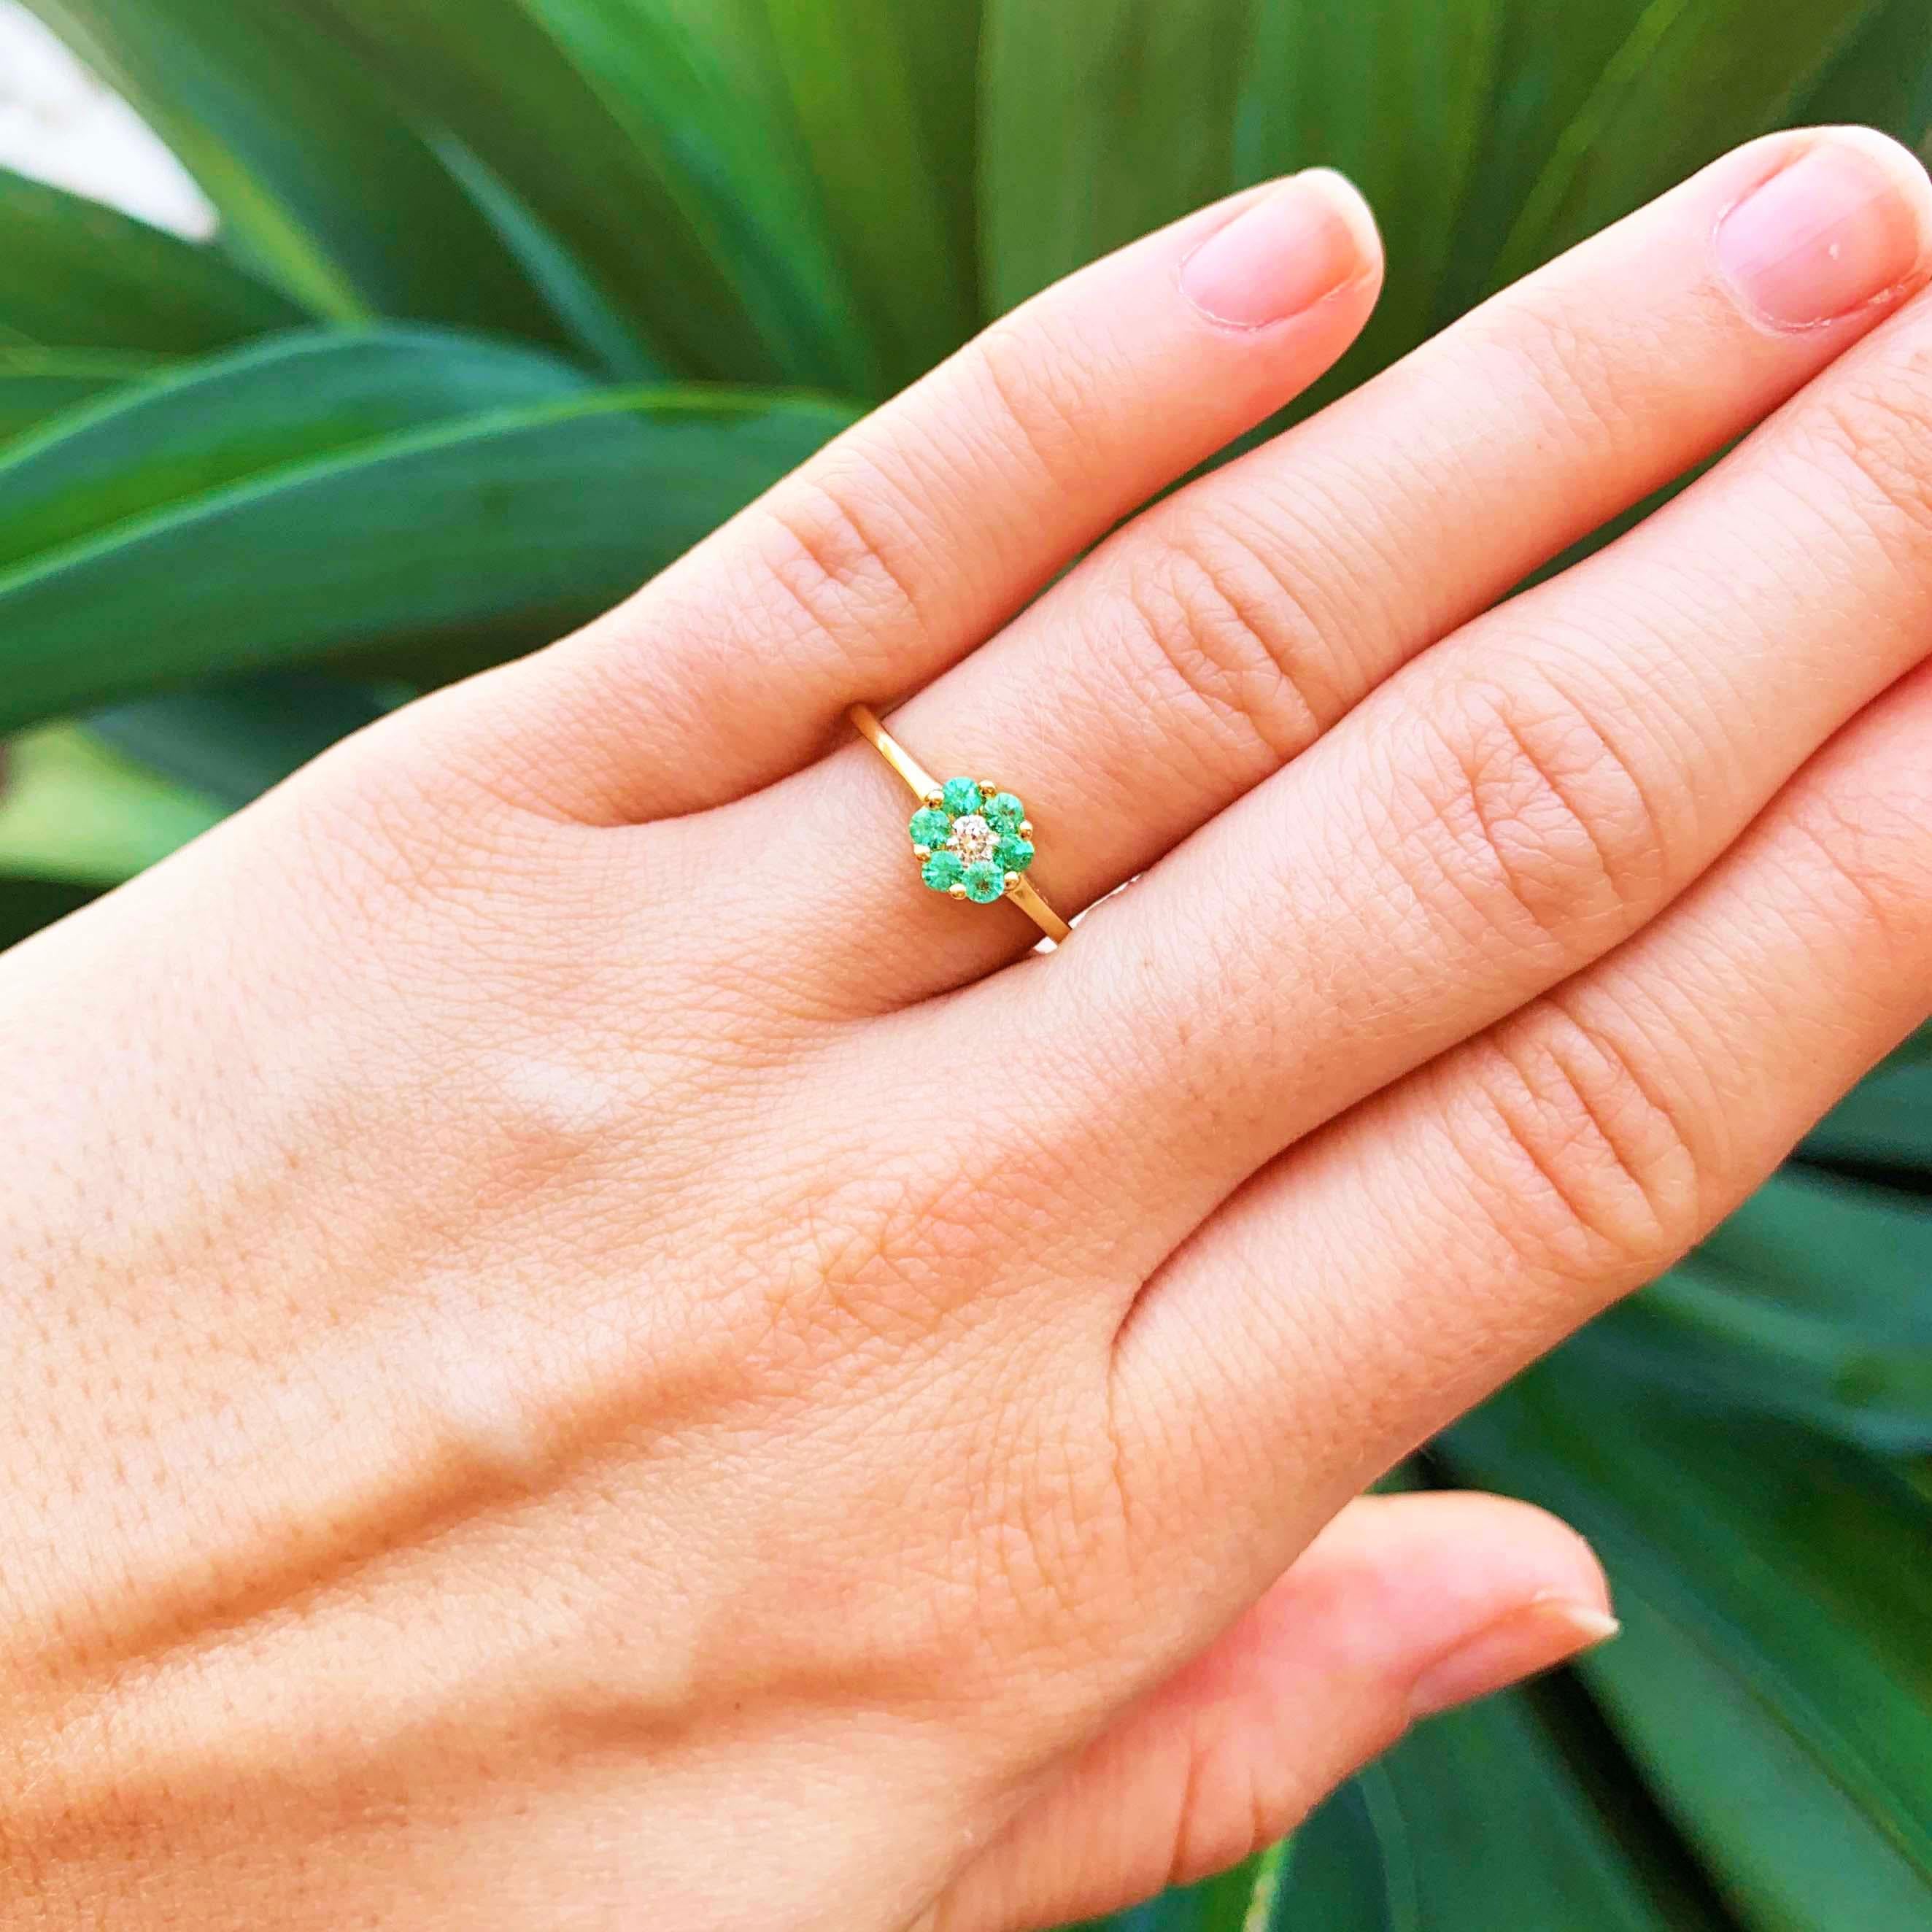 The precious genuine emerald and natural diamond ring is a May birthstone ring with all genuine gemstones and precious metal! The emerald and diamond flower ring has a flower design that is made with genuine, natural round emerald 